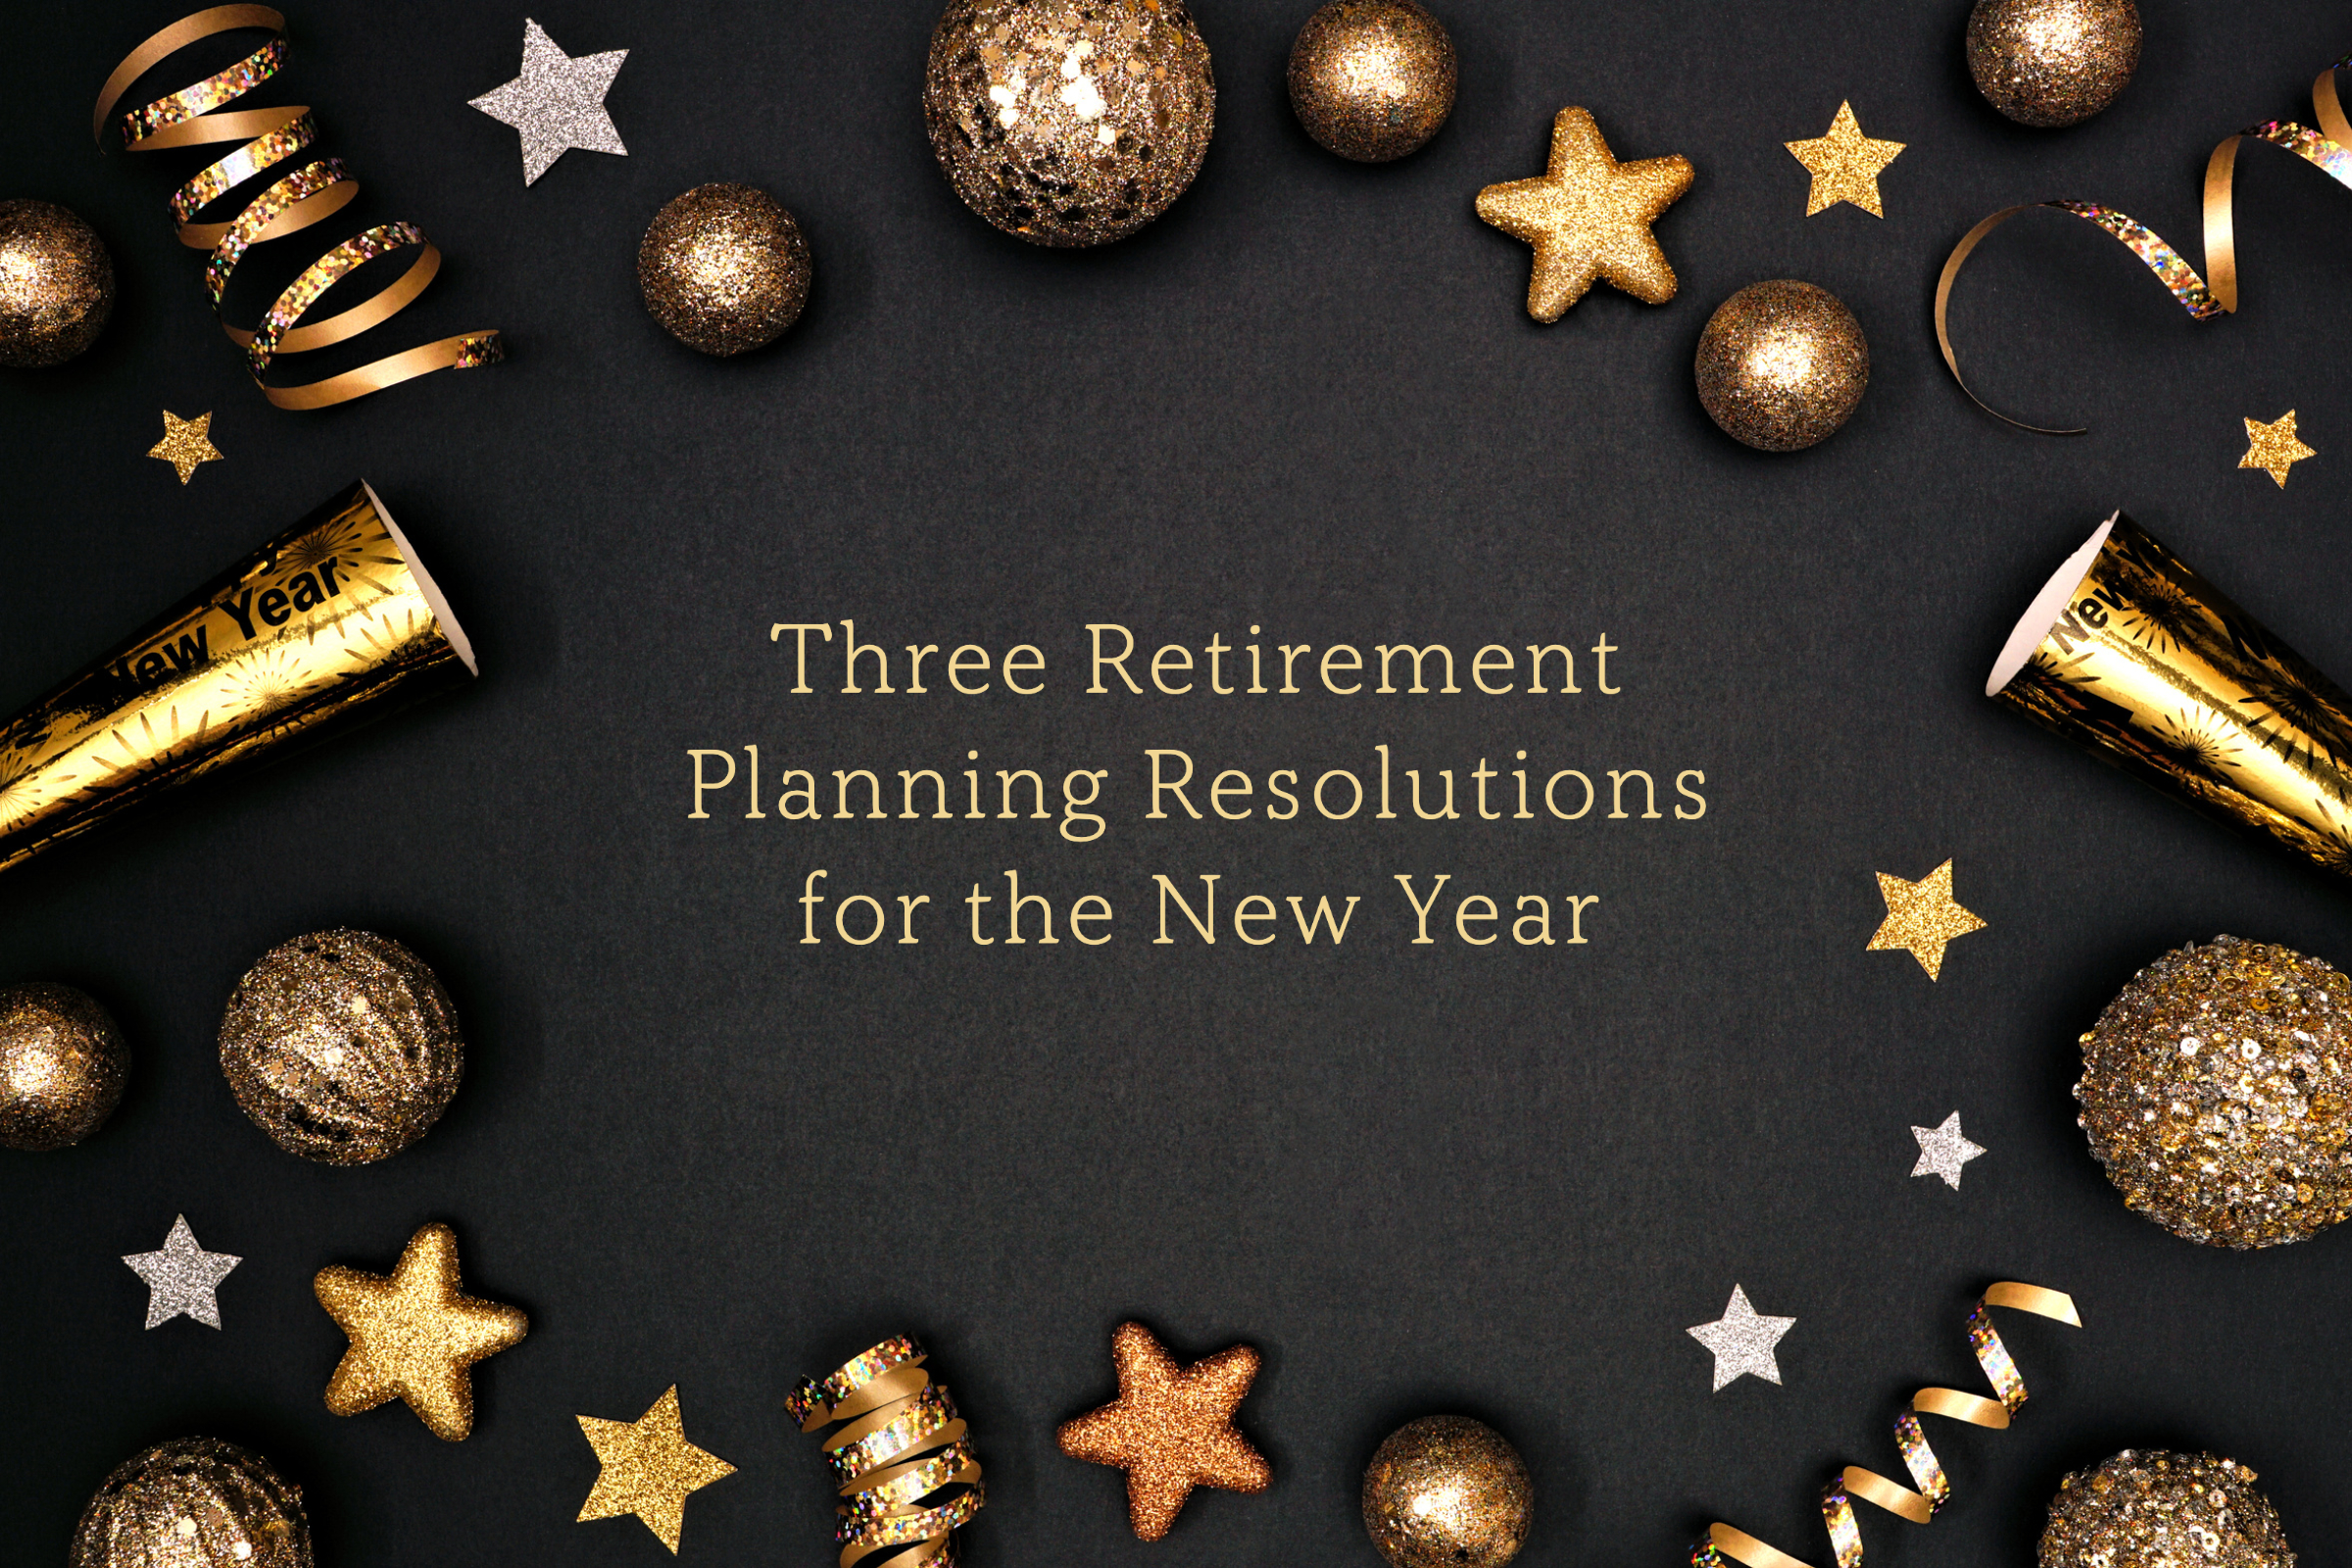 Three Retirement Planning Resolutions for the New Year